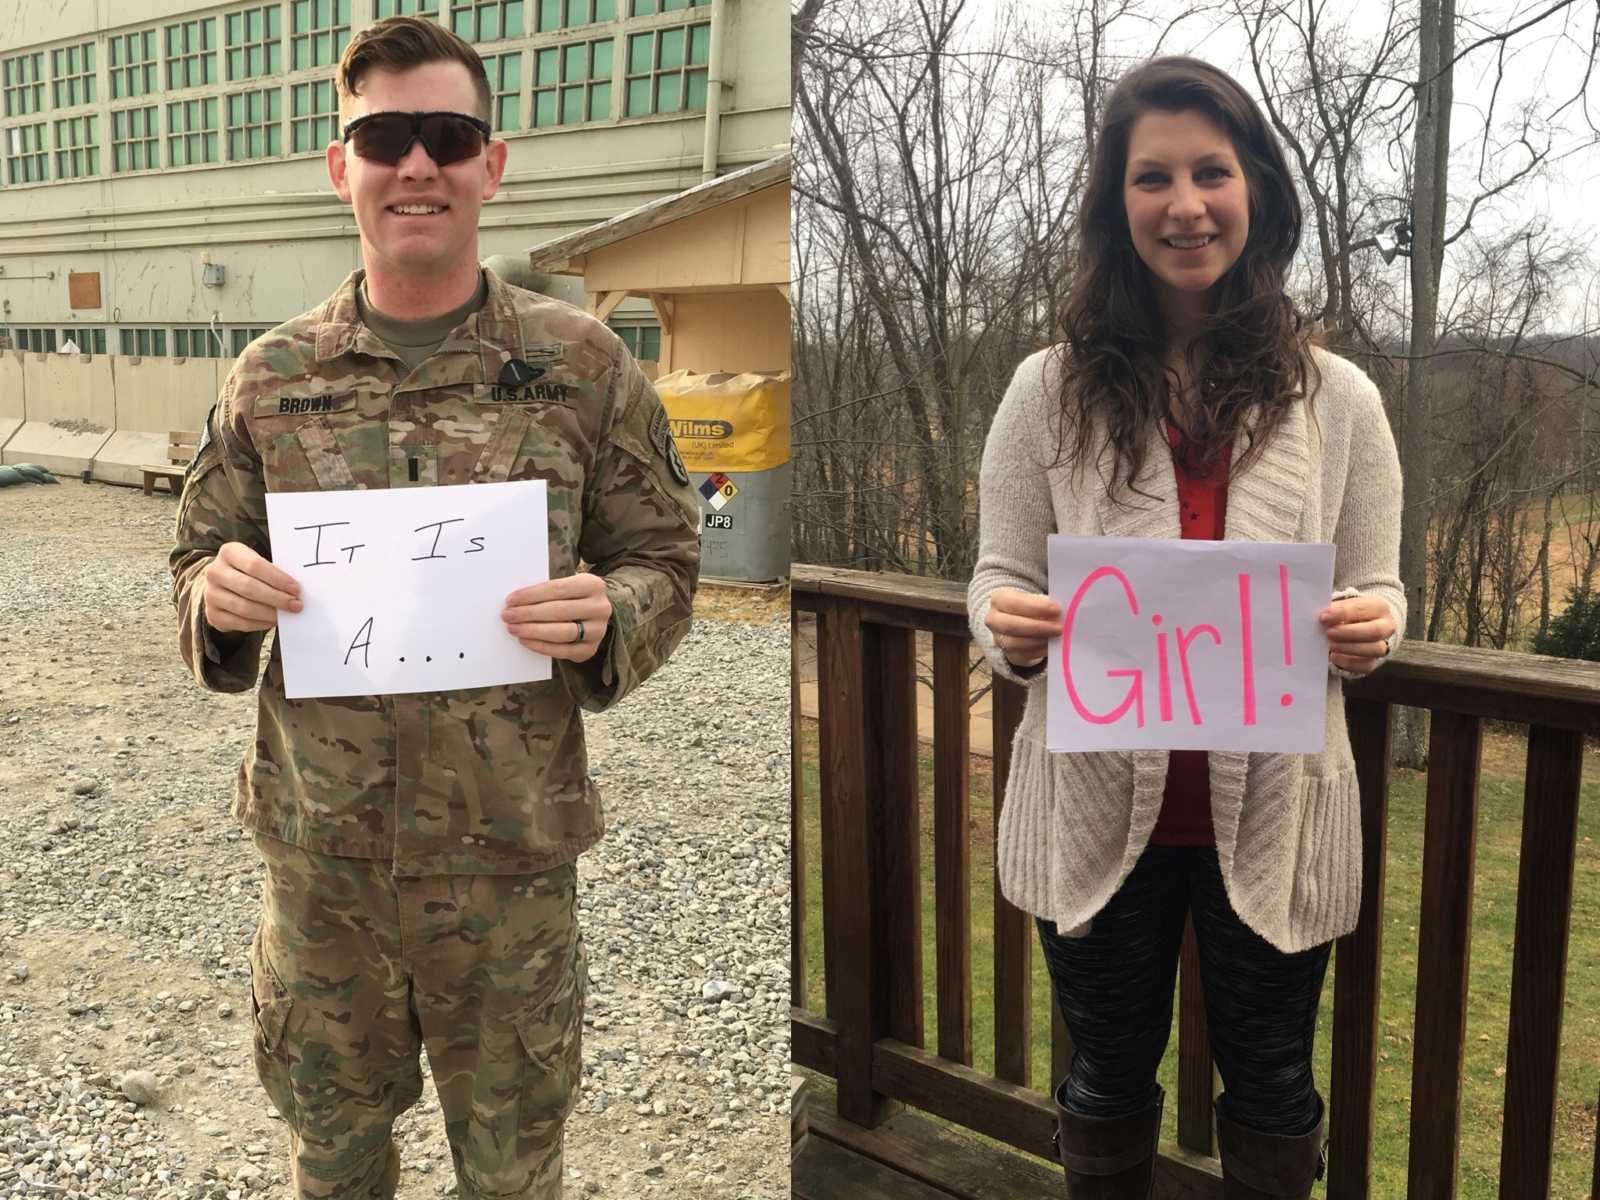 soldier deployed holding a piece of paper saying, "it's a..." while wife is at home holding paper saying, "girl"